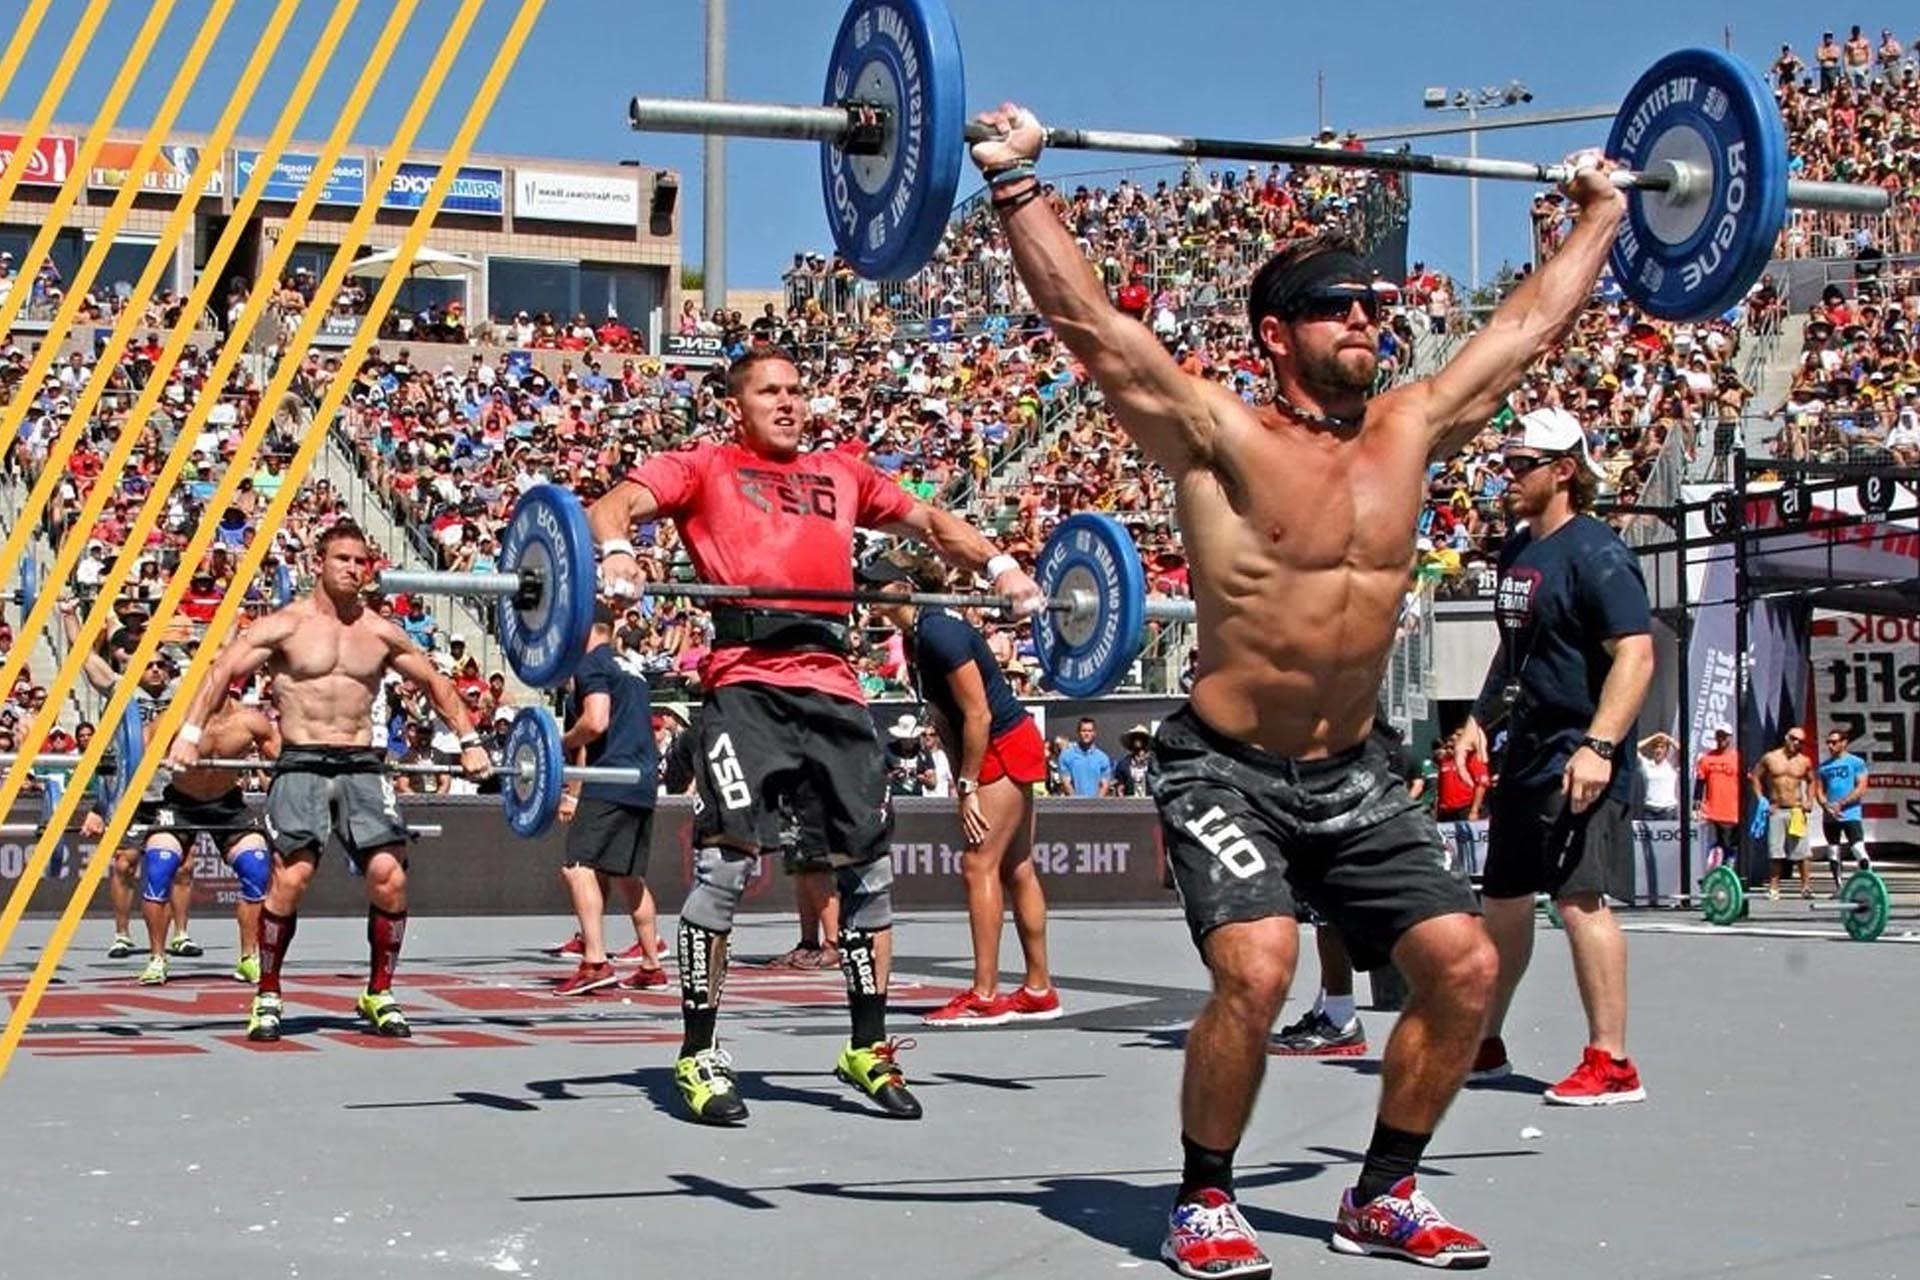 The events generally are not revealed before the Games, can include unexpected elements to challenge the athletes' readiness to compete, and are designed to test the athletes' fitness using CrossFit's own criteria. Winners of the CrossFit Games earn cash prizes and the title of "Fittest on Earth."